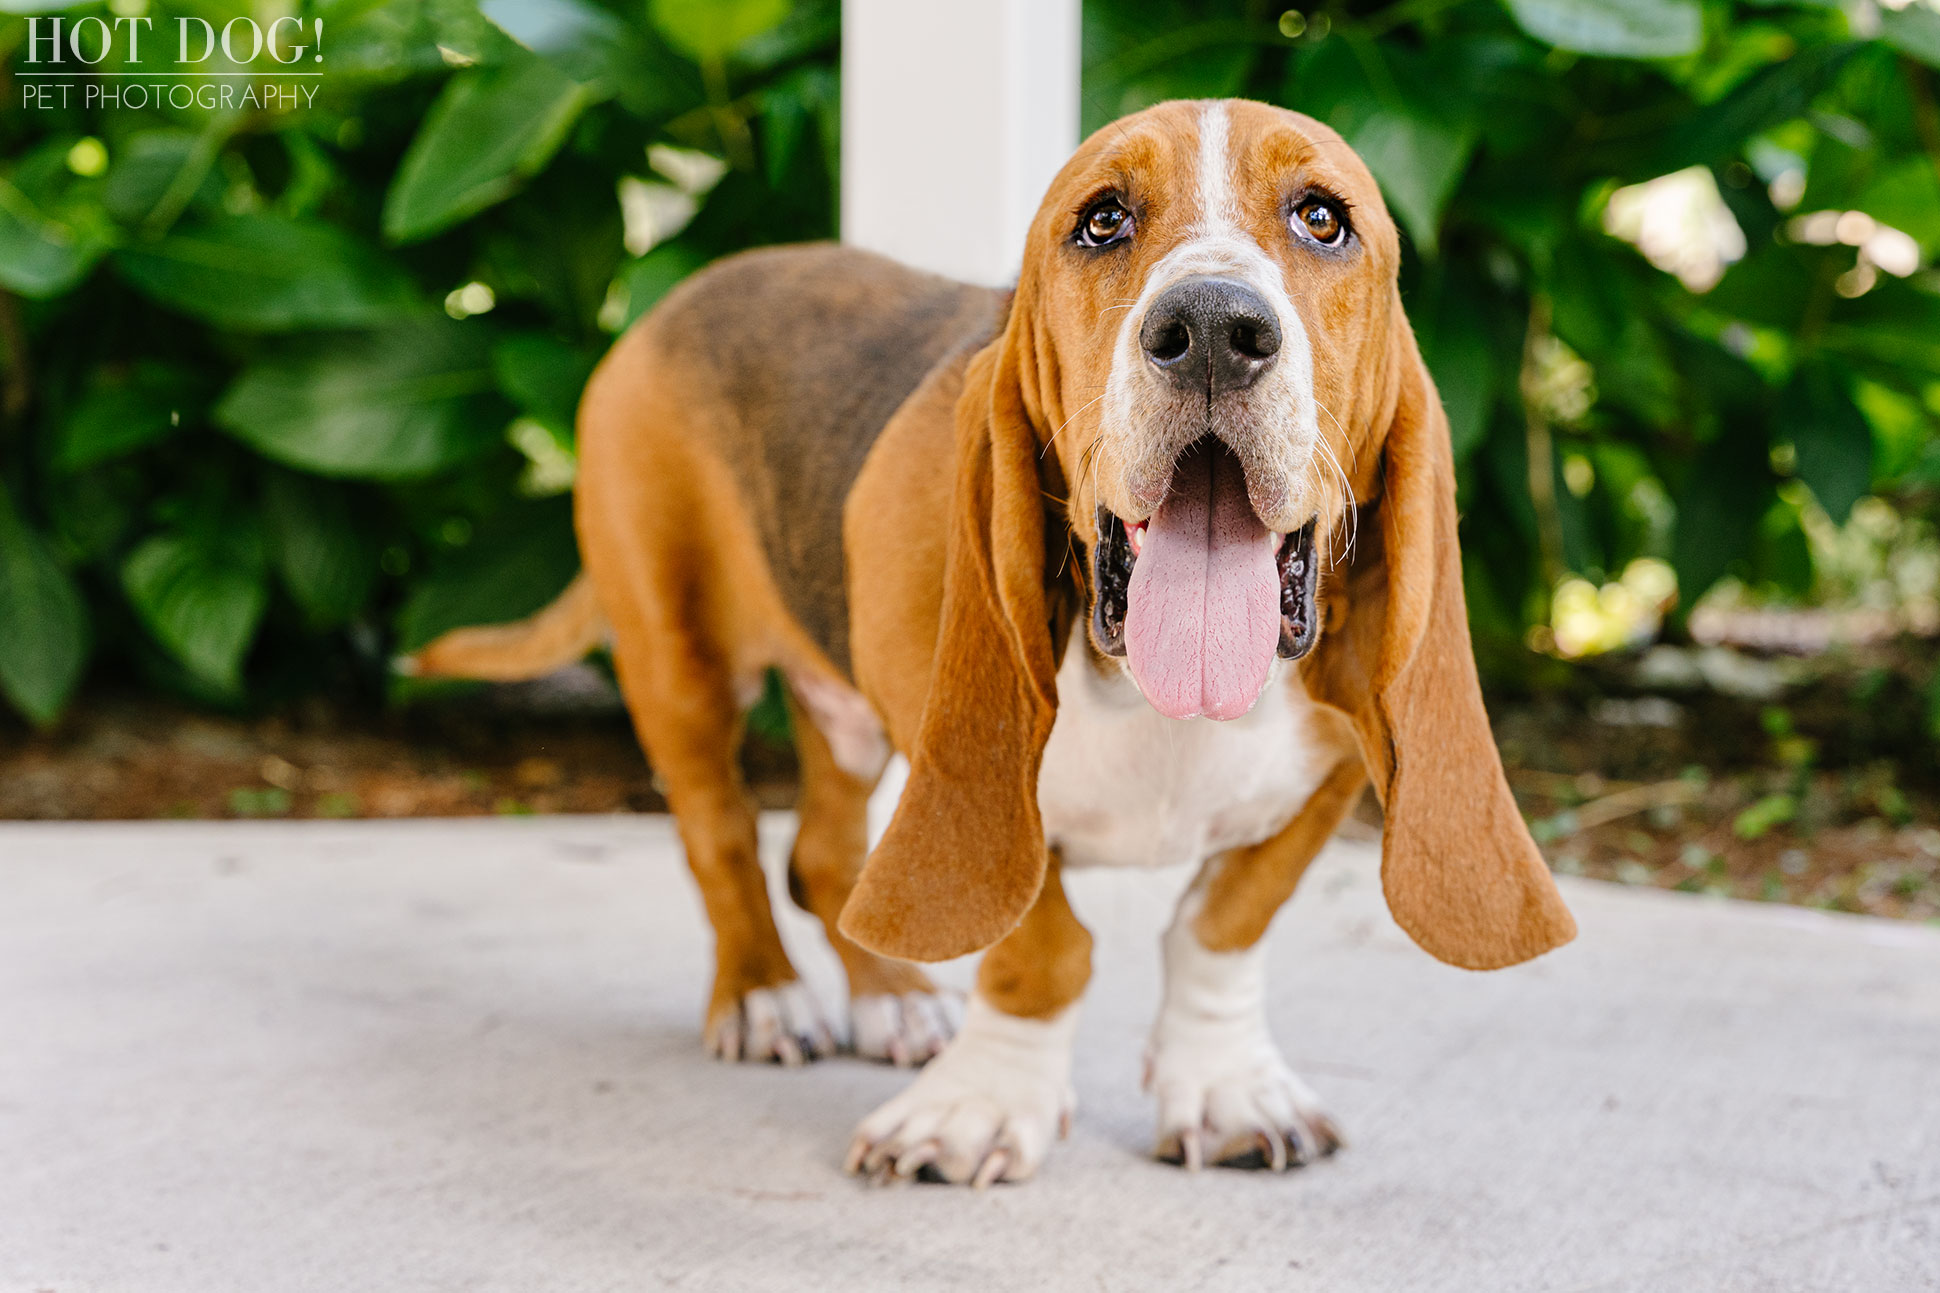 Basset hounds are the subjects of a professional pet portrait in Cypress Grove Park in Orlando, Florida.